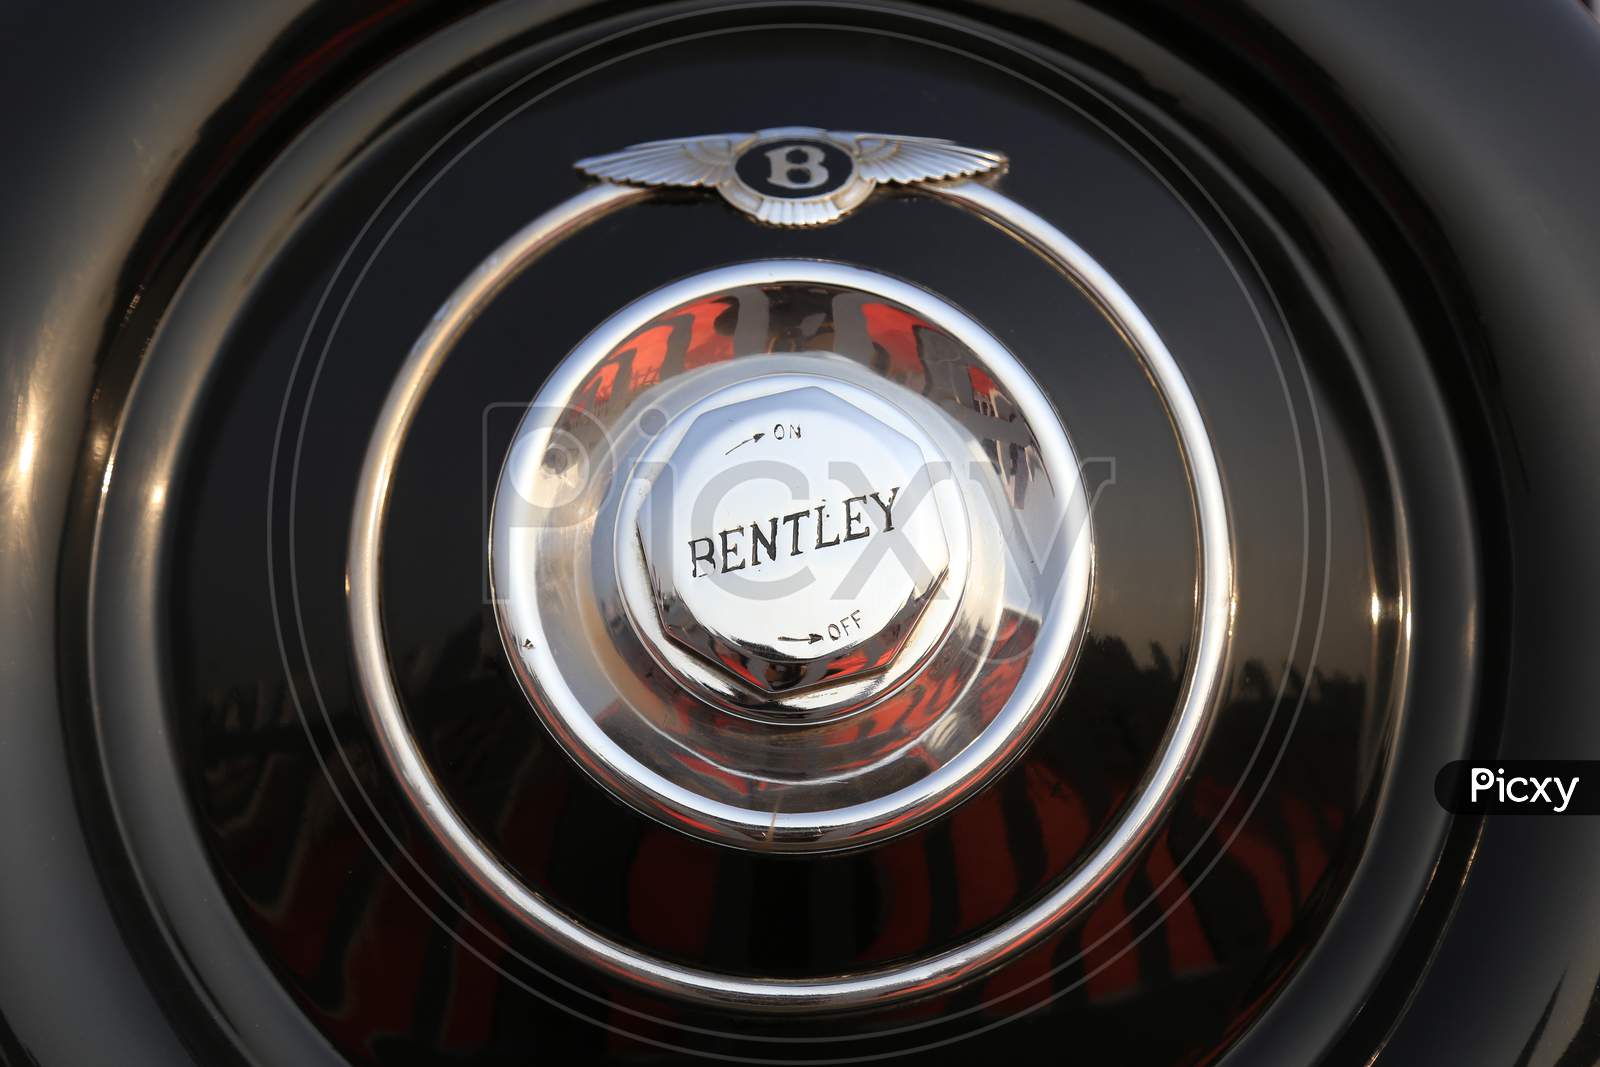 Bentley Switch of a car